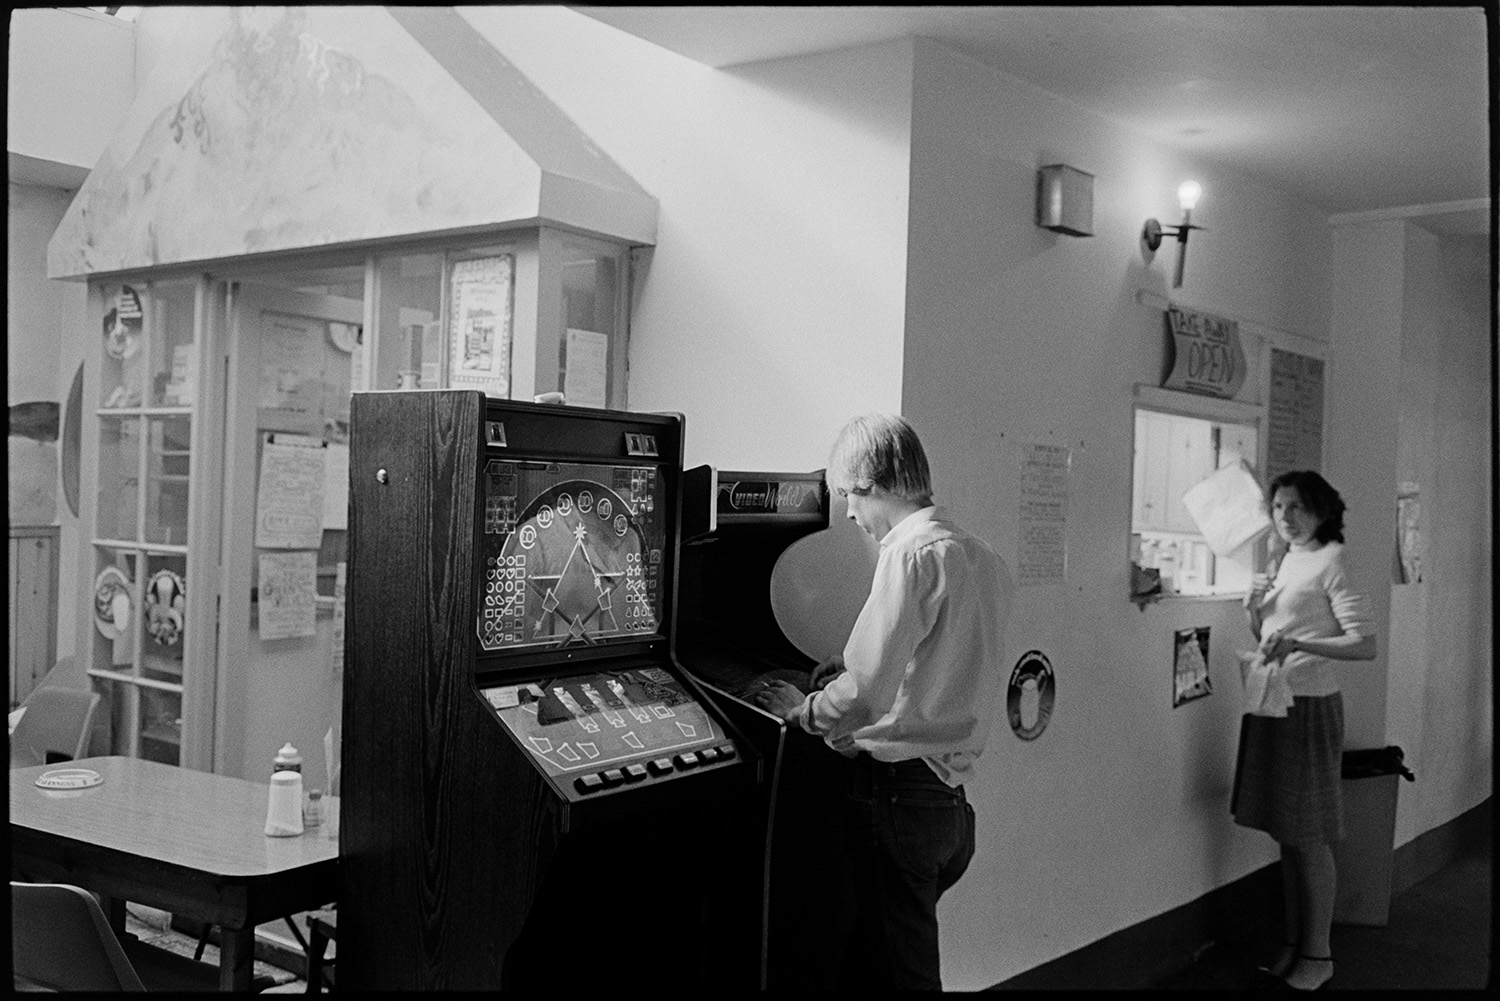 Tea room in covered market. Fruit Machine. 
[A man playing on a fruit machine by a café in Bideford. A woman is waiting for her take away order from the café at a serving hatch in the background.]